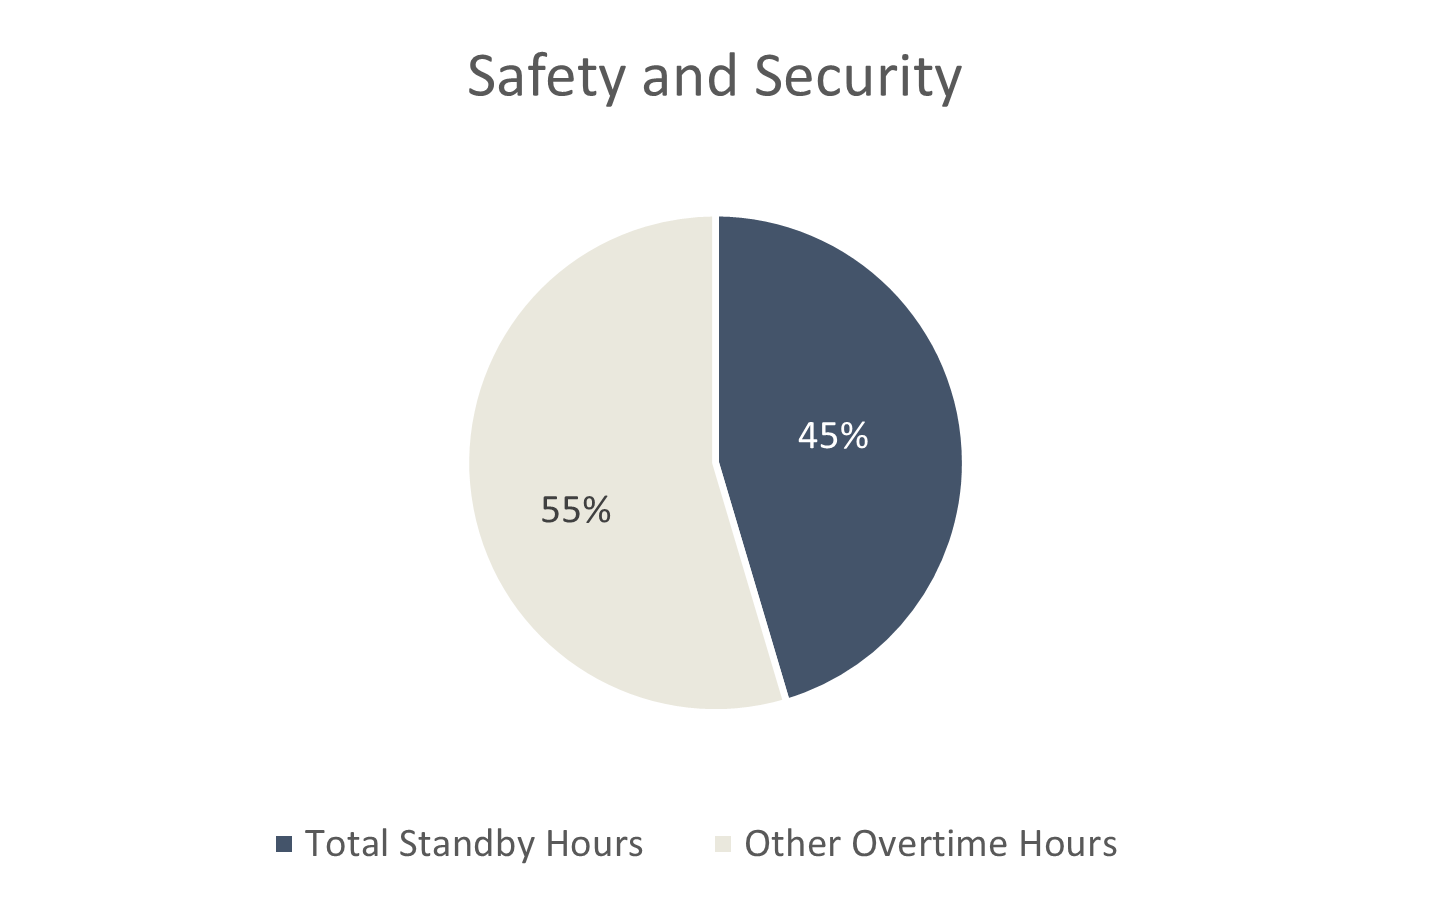 The figure provides a breakdown of the amount of standby hours compared to other overtime hours in the Safety and Security group between fiscal years 2017-2018 and 2019-2020. Standby overtime hours amount to 45% while other overtime is 55%.